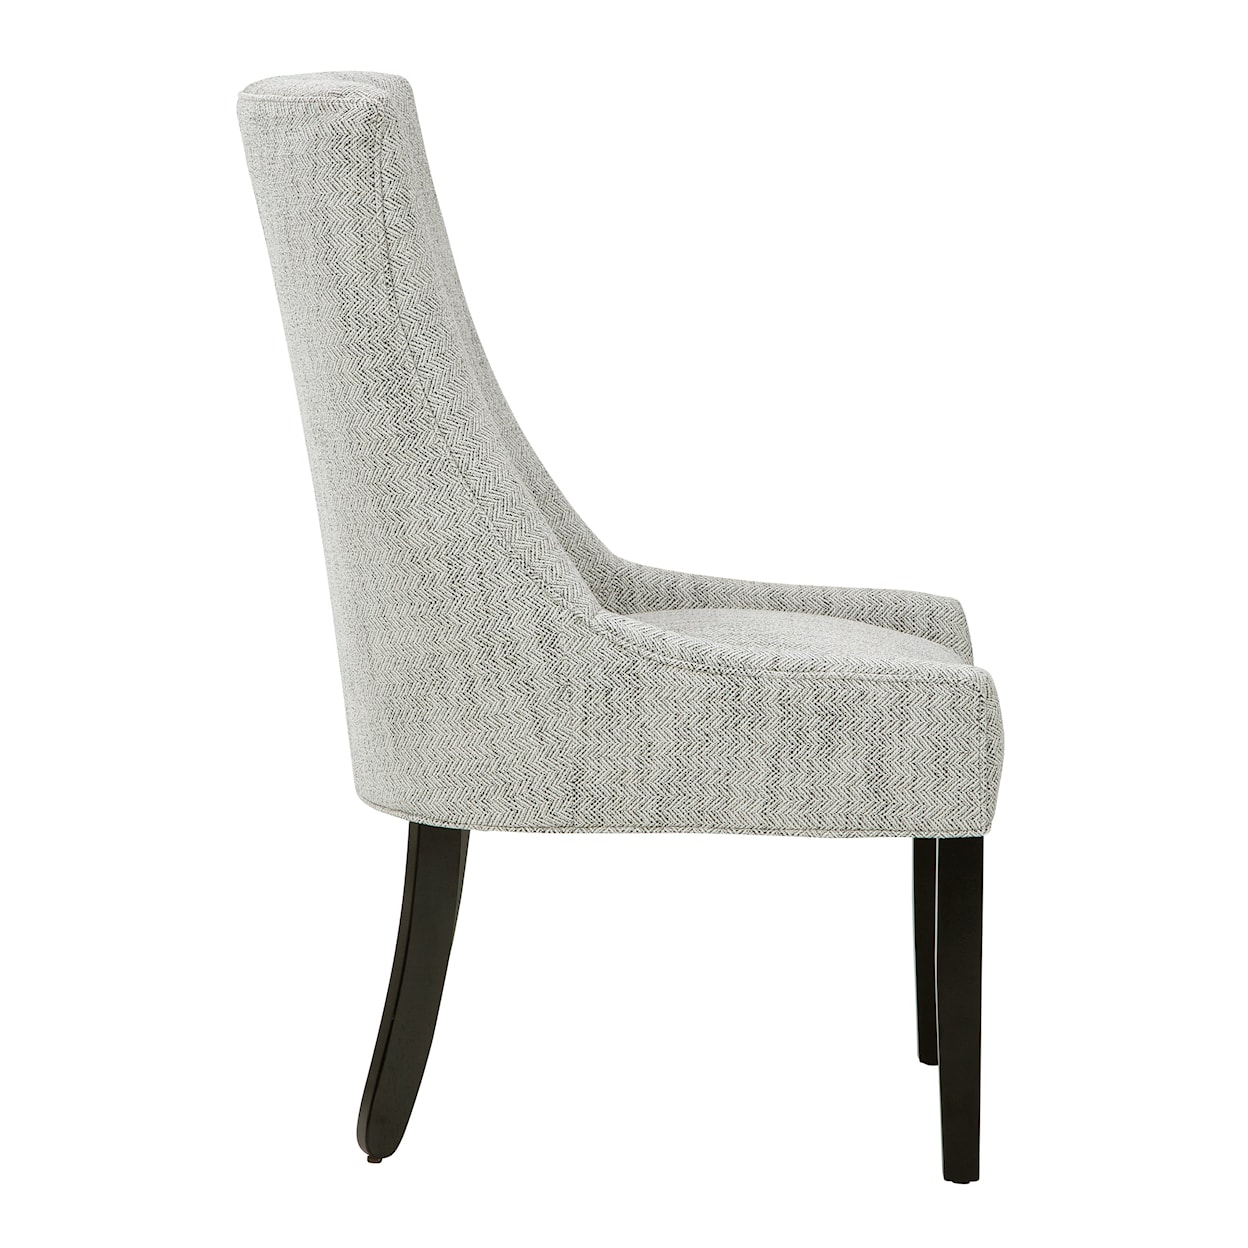 Hekman Upholstery Chandler Dining Chair